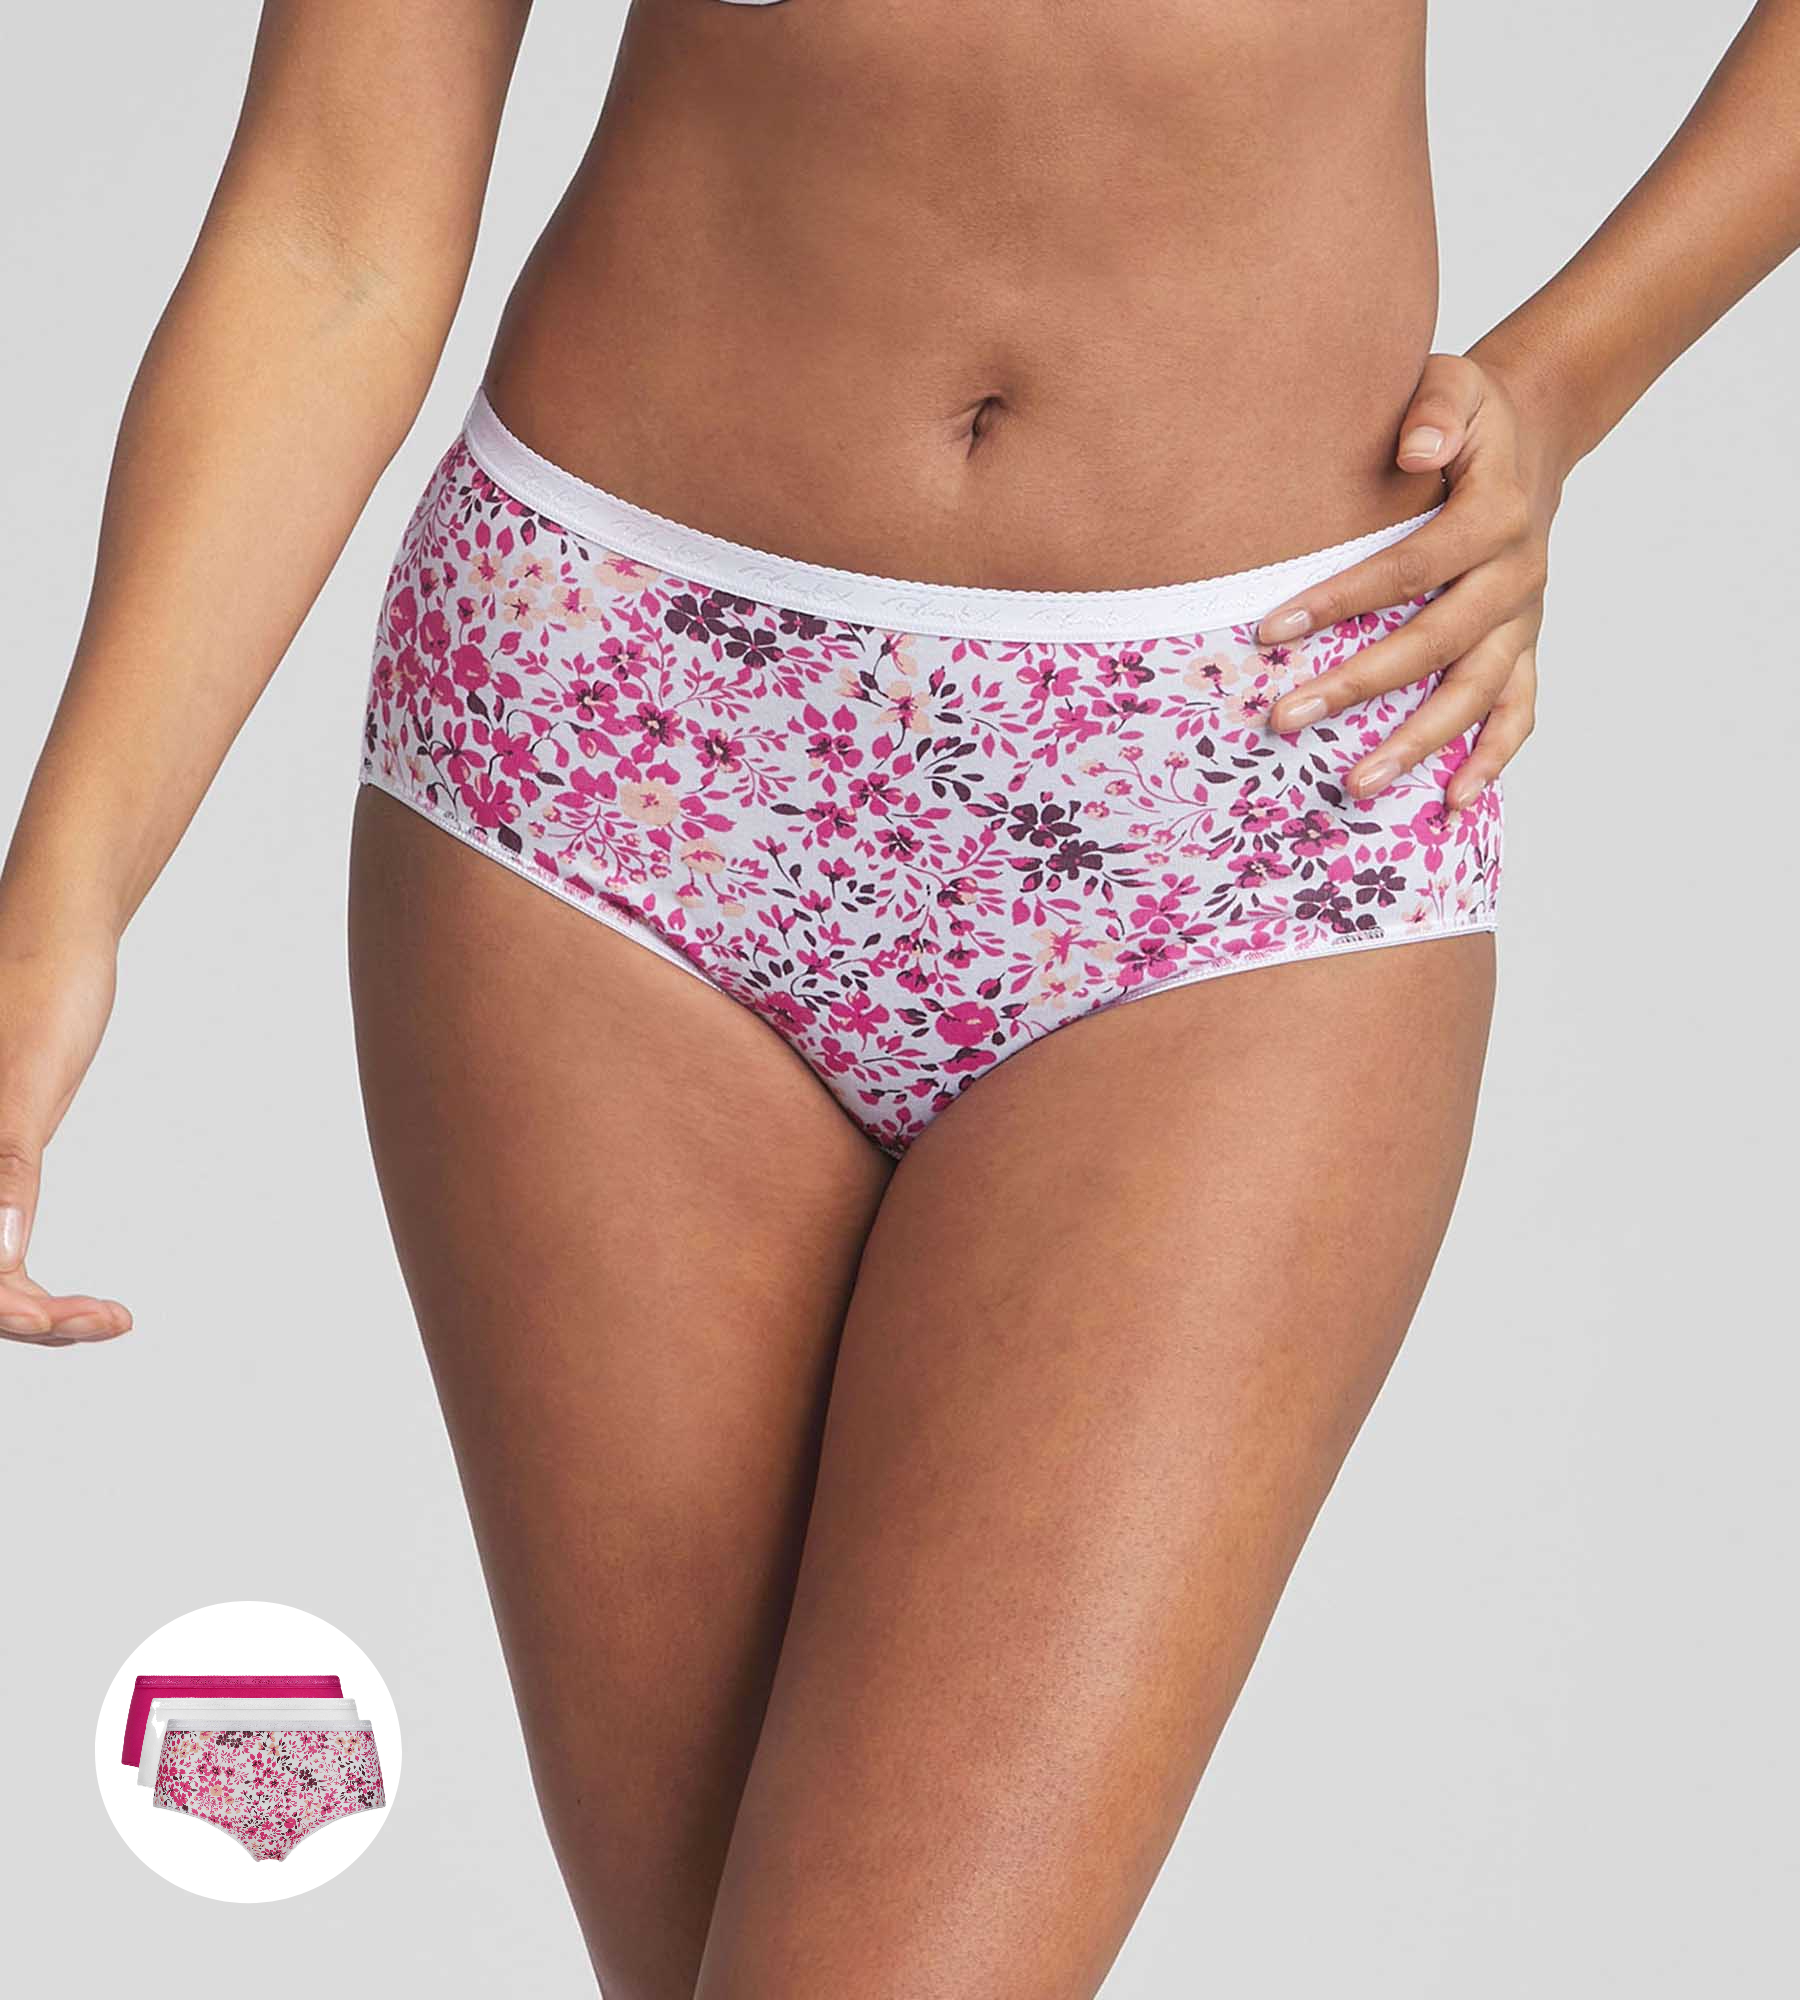 Pack of 3 midi knickers in Floral Print/White/Fuschia - Organic Cotton